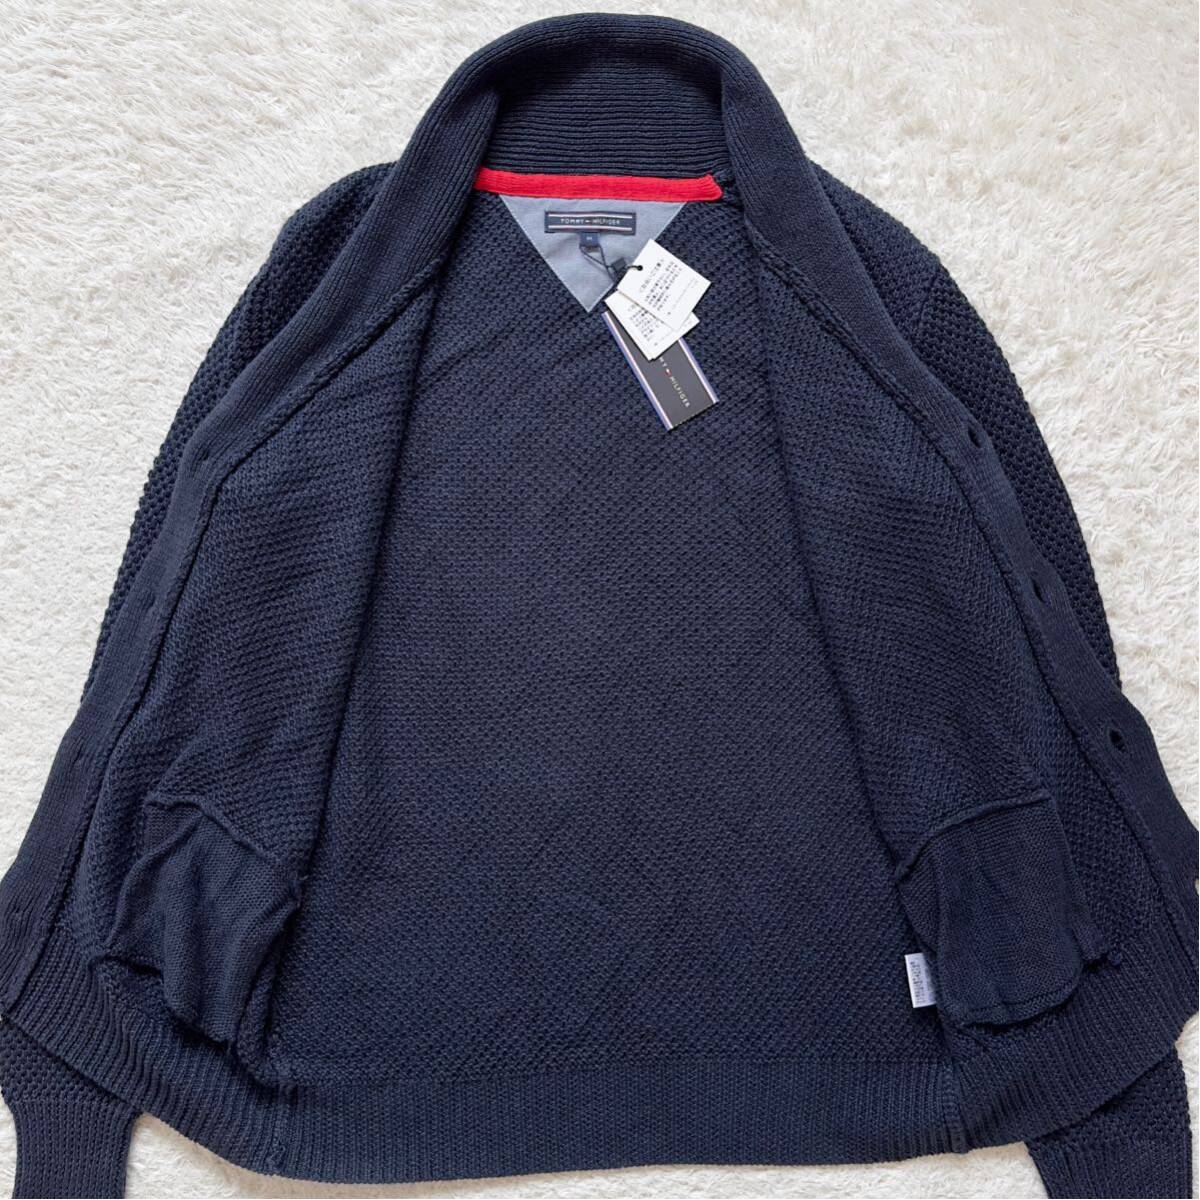  unused tag attaching / Tommy Hilfiger TOMMY HILFIGER summer knitted jacket cardigan shawl color linen100% flax navy navy blue M